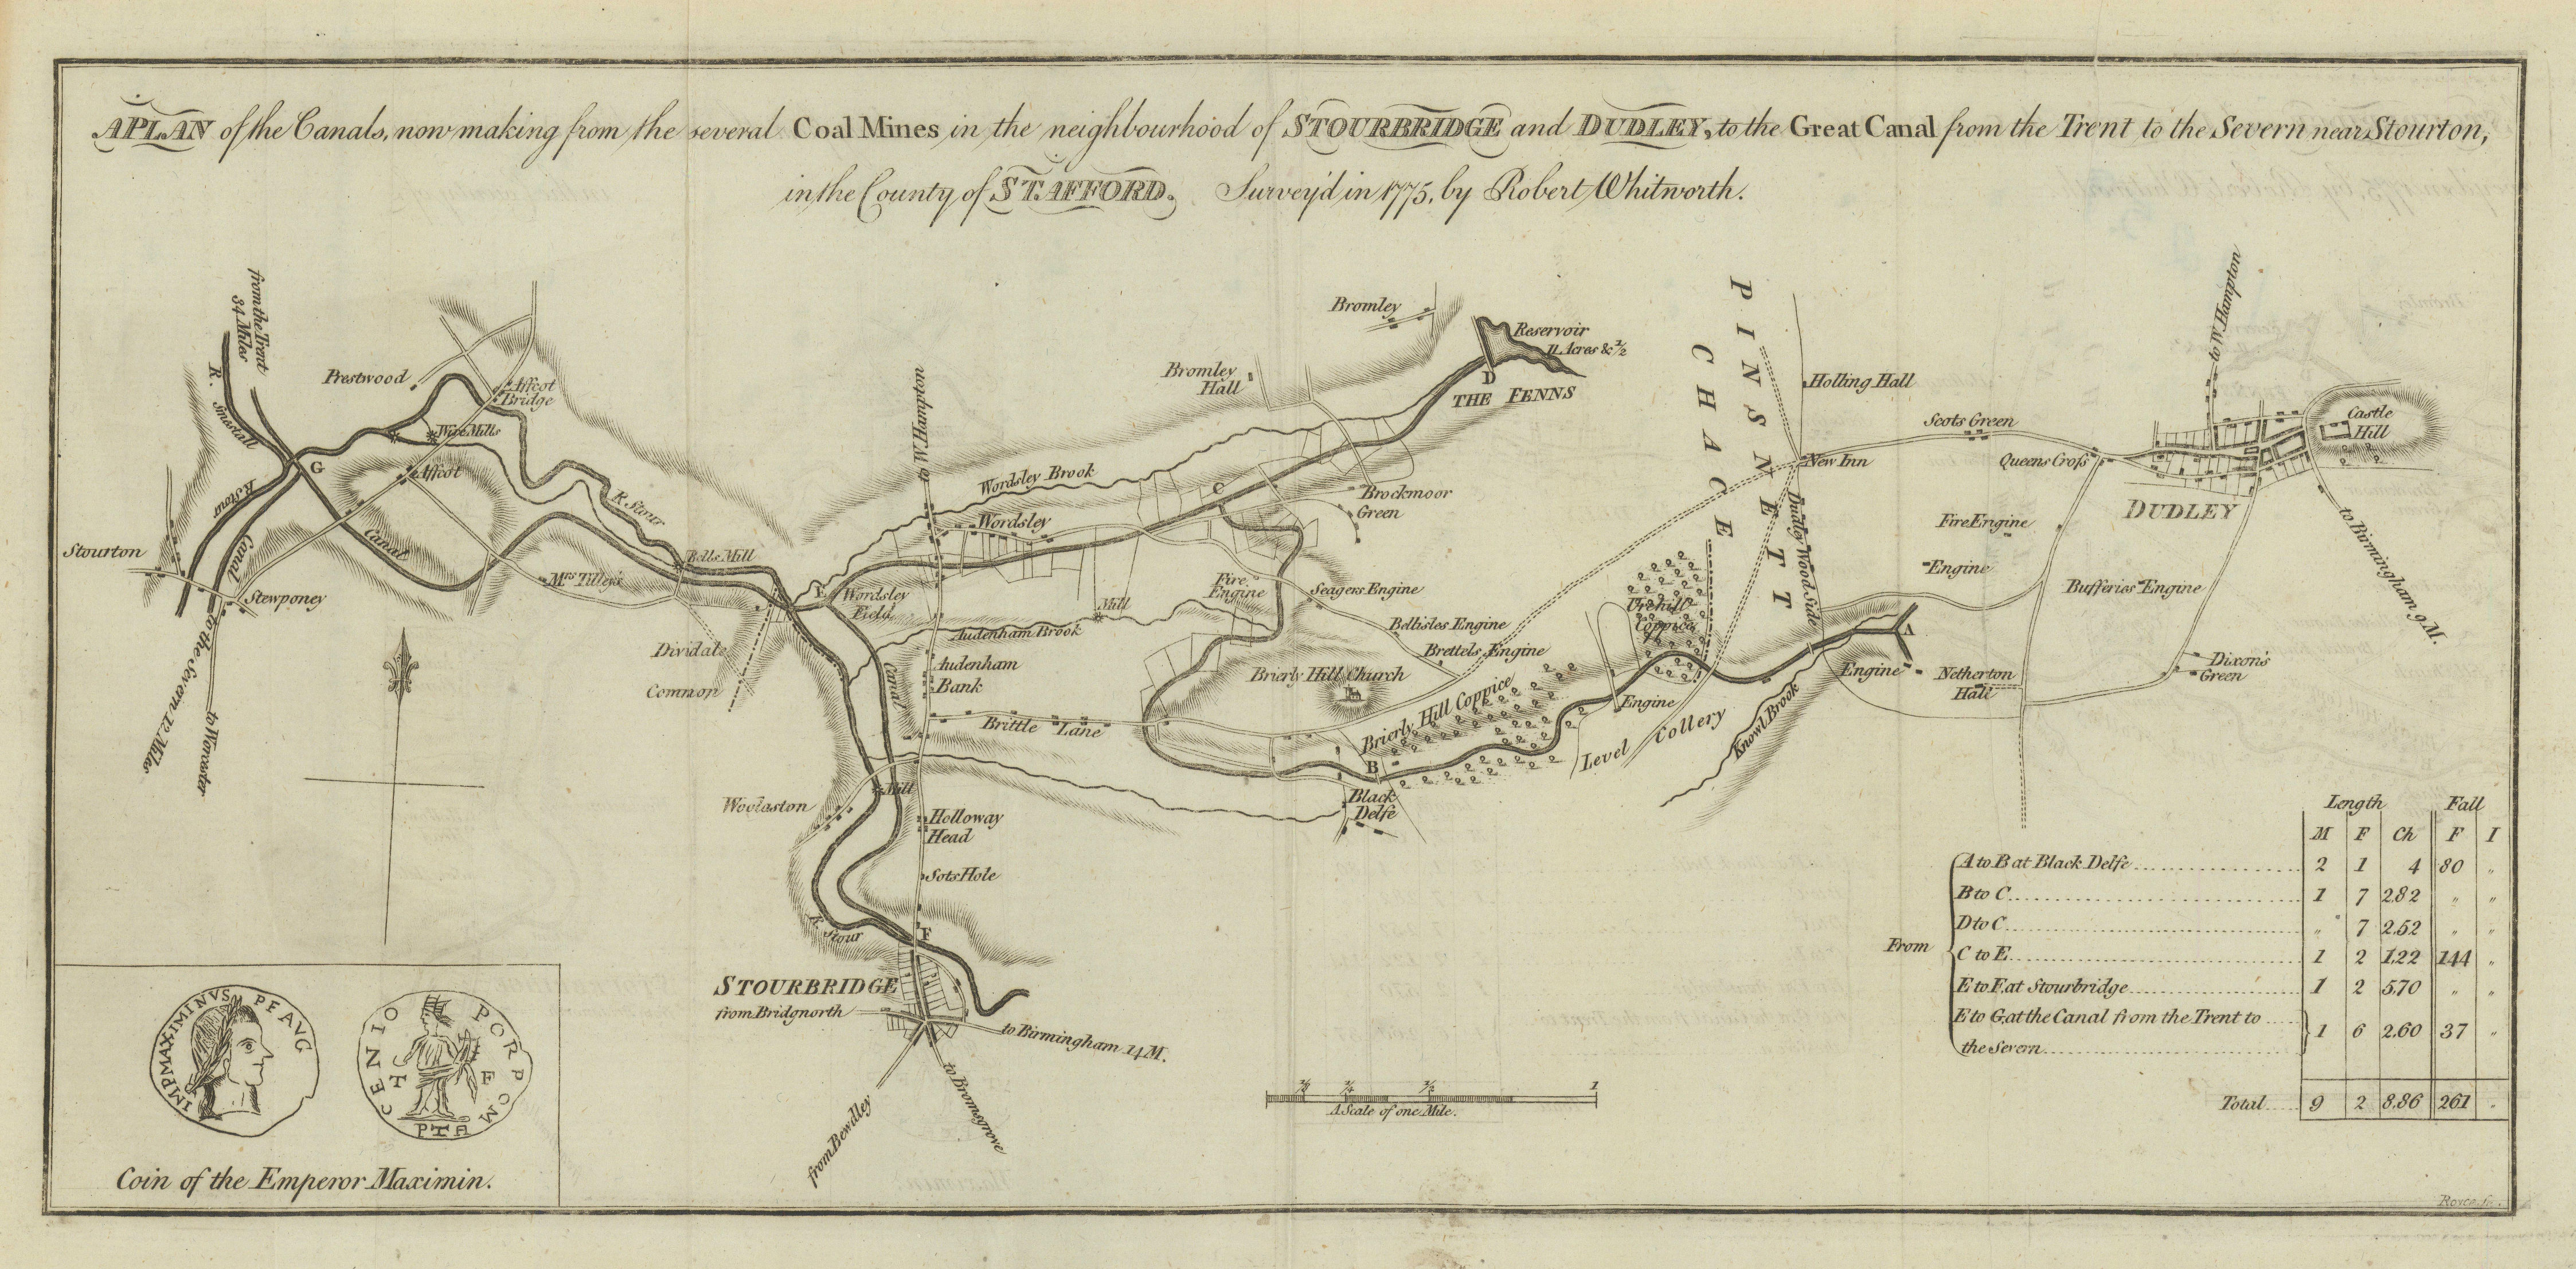 Associate Product Canal from Stourbridge & Dudley to Stourton. Stourport Ring. WHITWORTH 1777 map